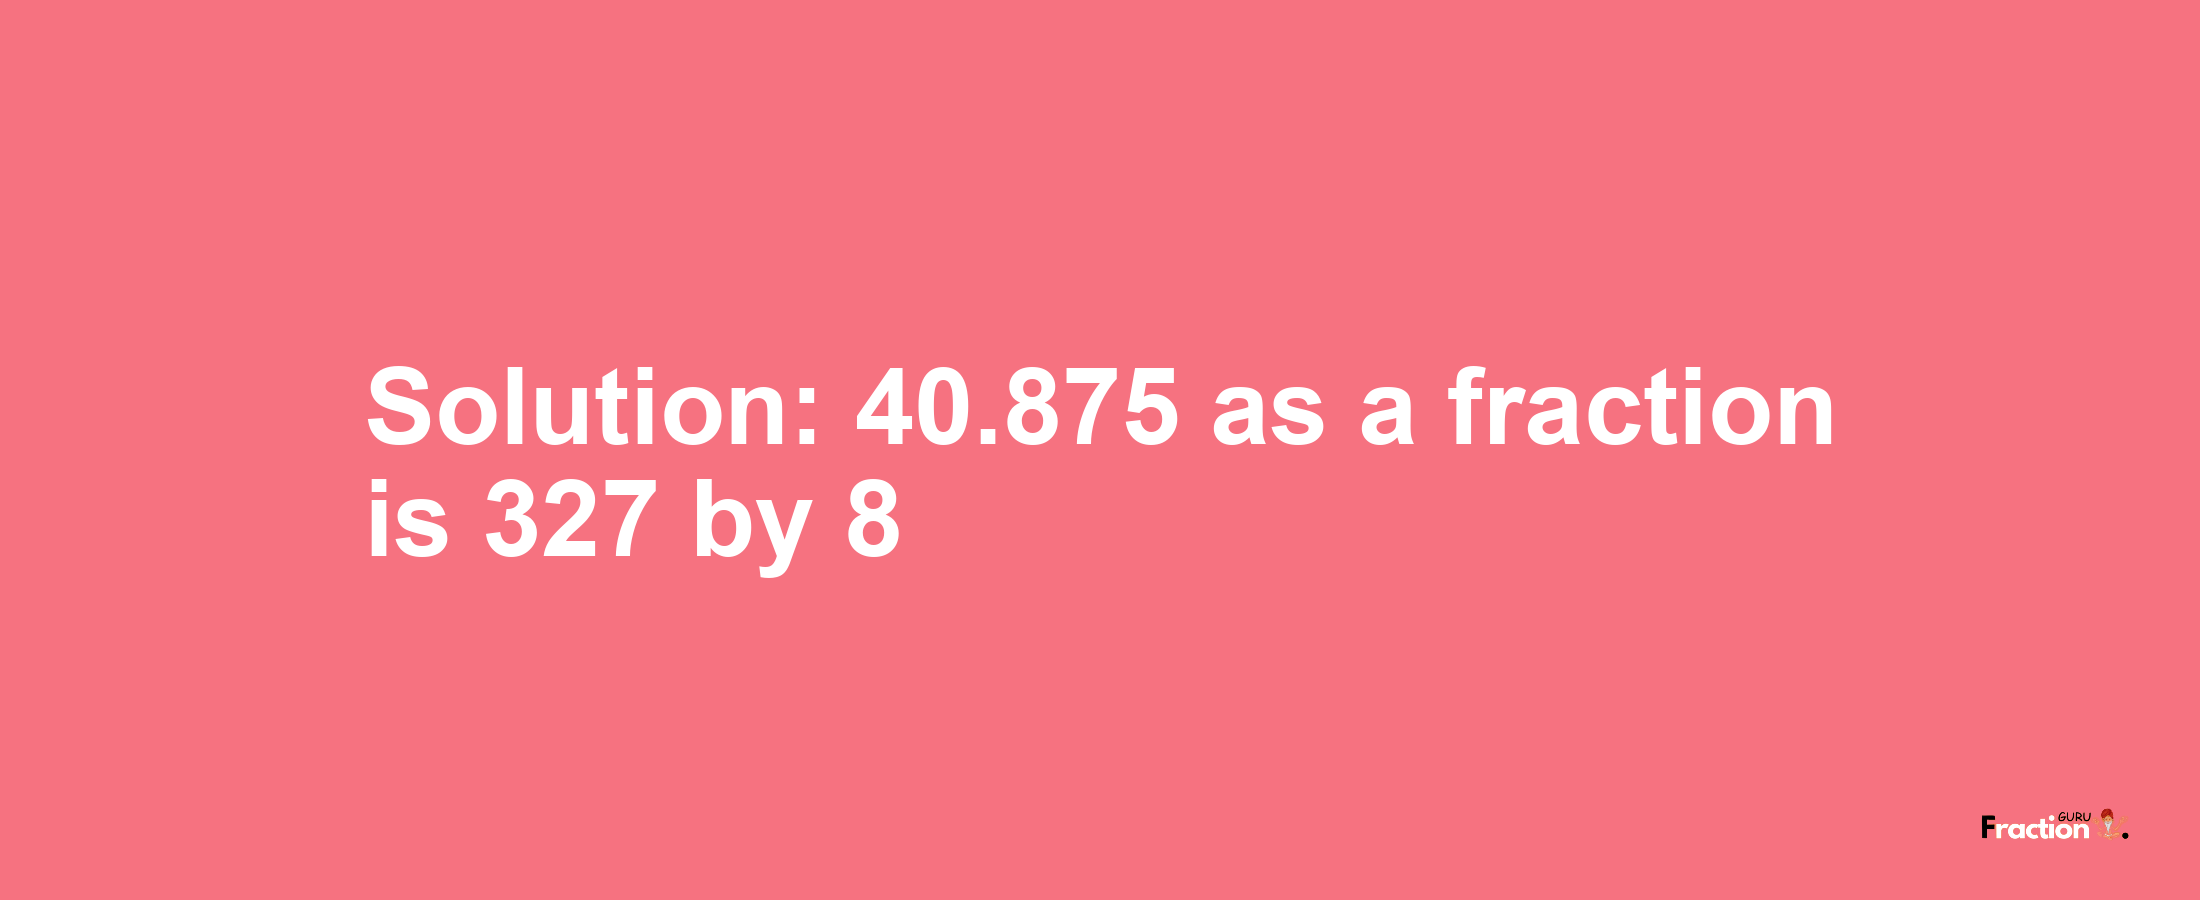 Solution:40.875 as a fraction is 327/8